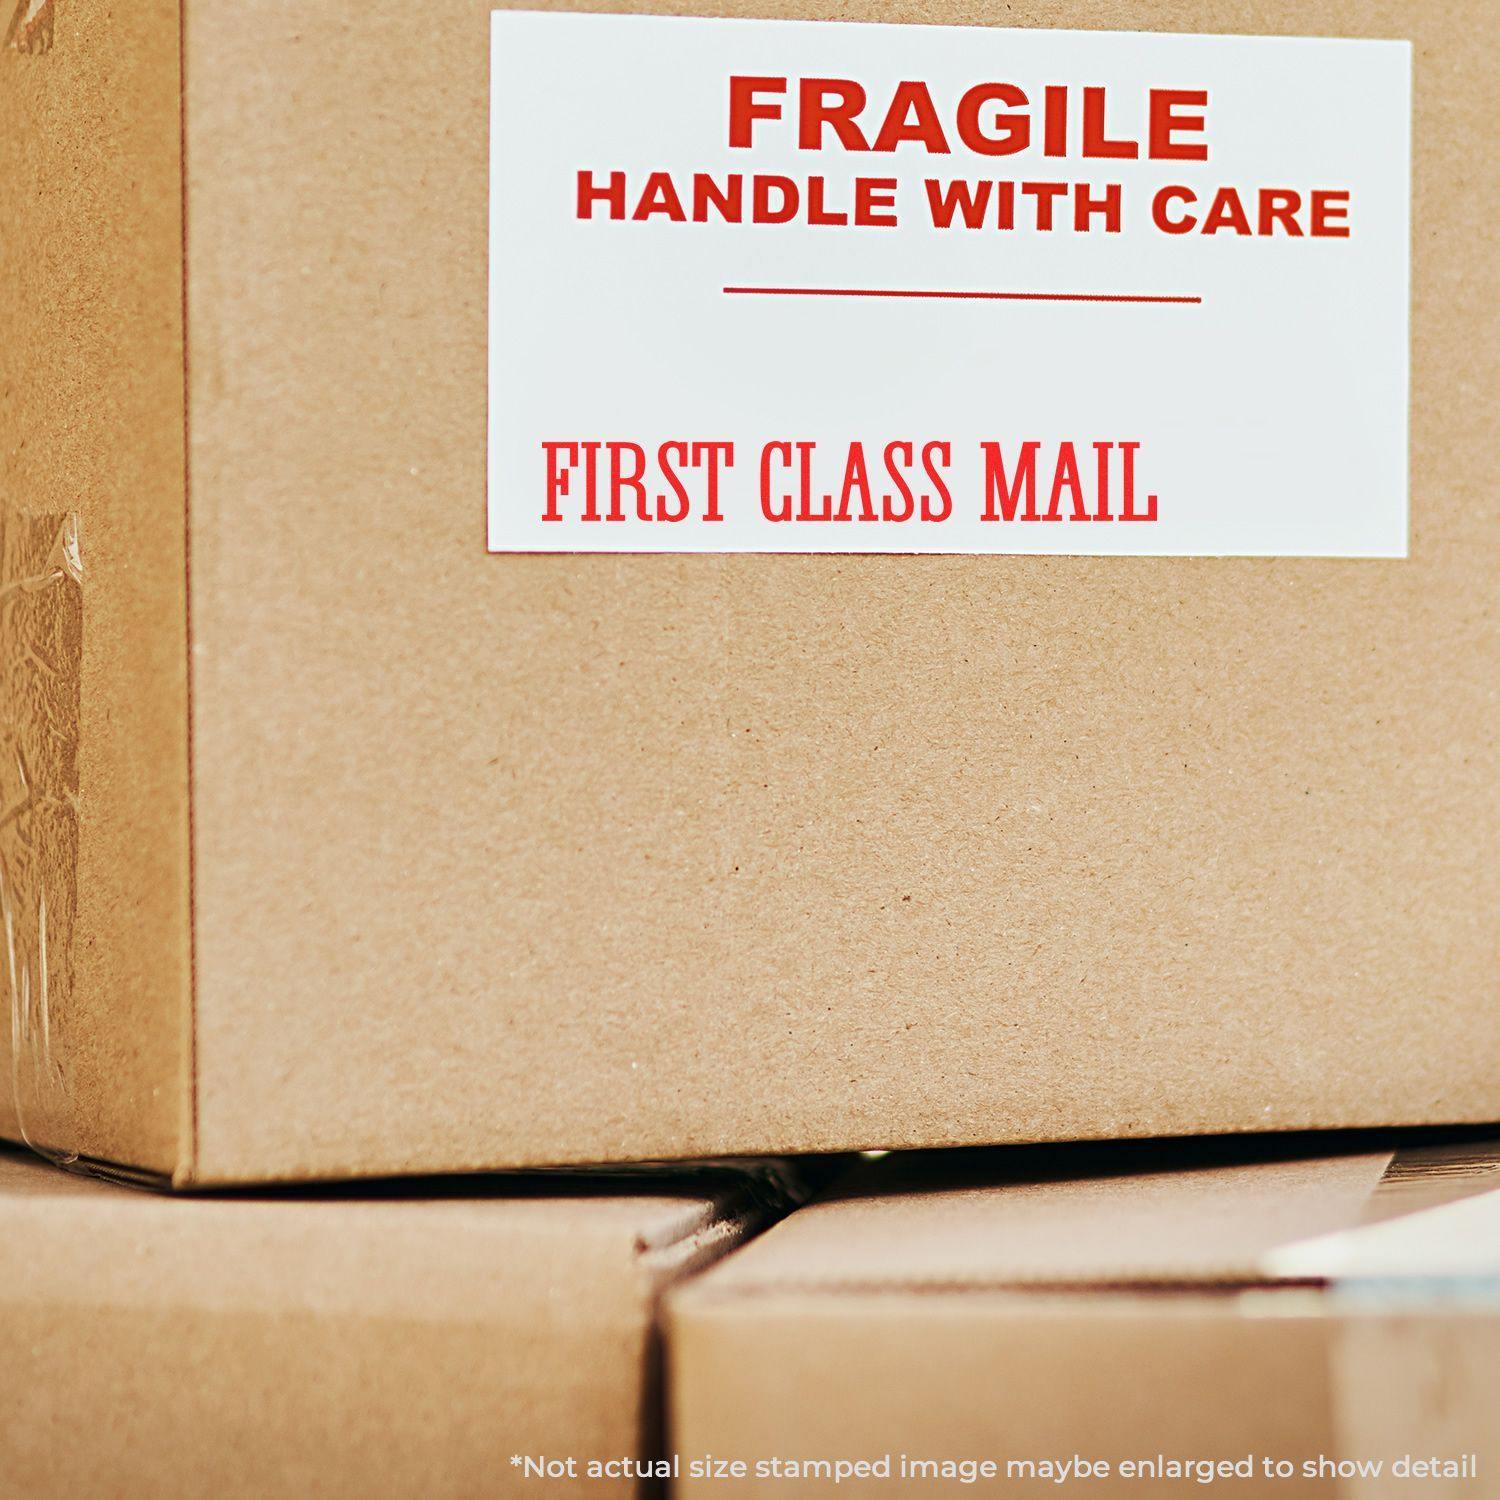 A stock office rubber stamp with a stamped image showing how the text "FIRST CLASS MAIL" in a large times font is displayed after stamping.